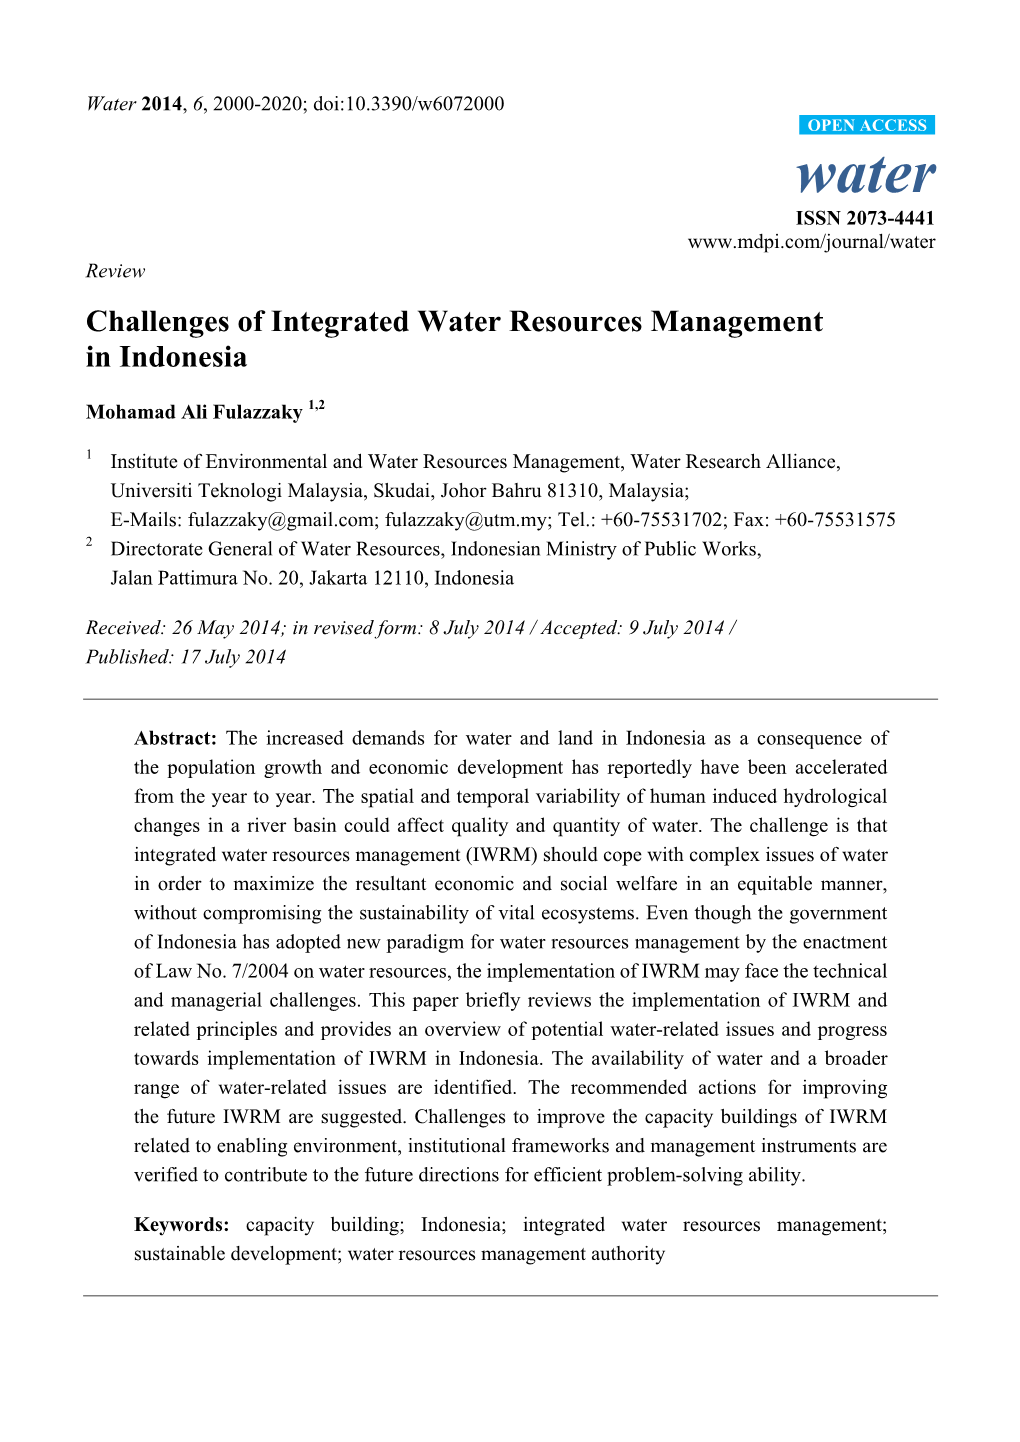 Challenges of Integrated Water Resources Management in Indonesia